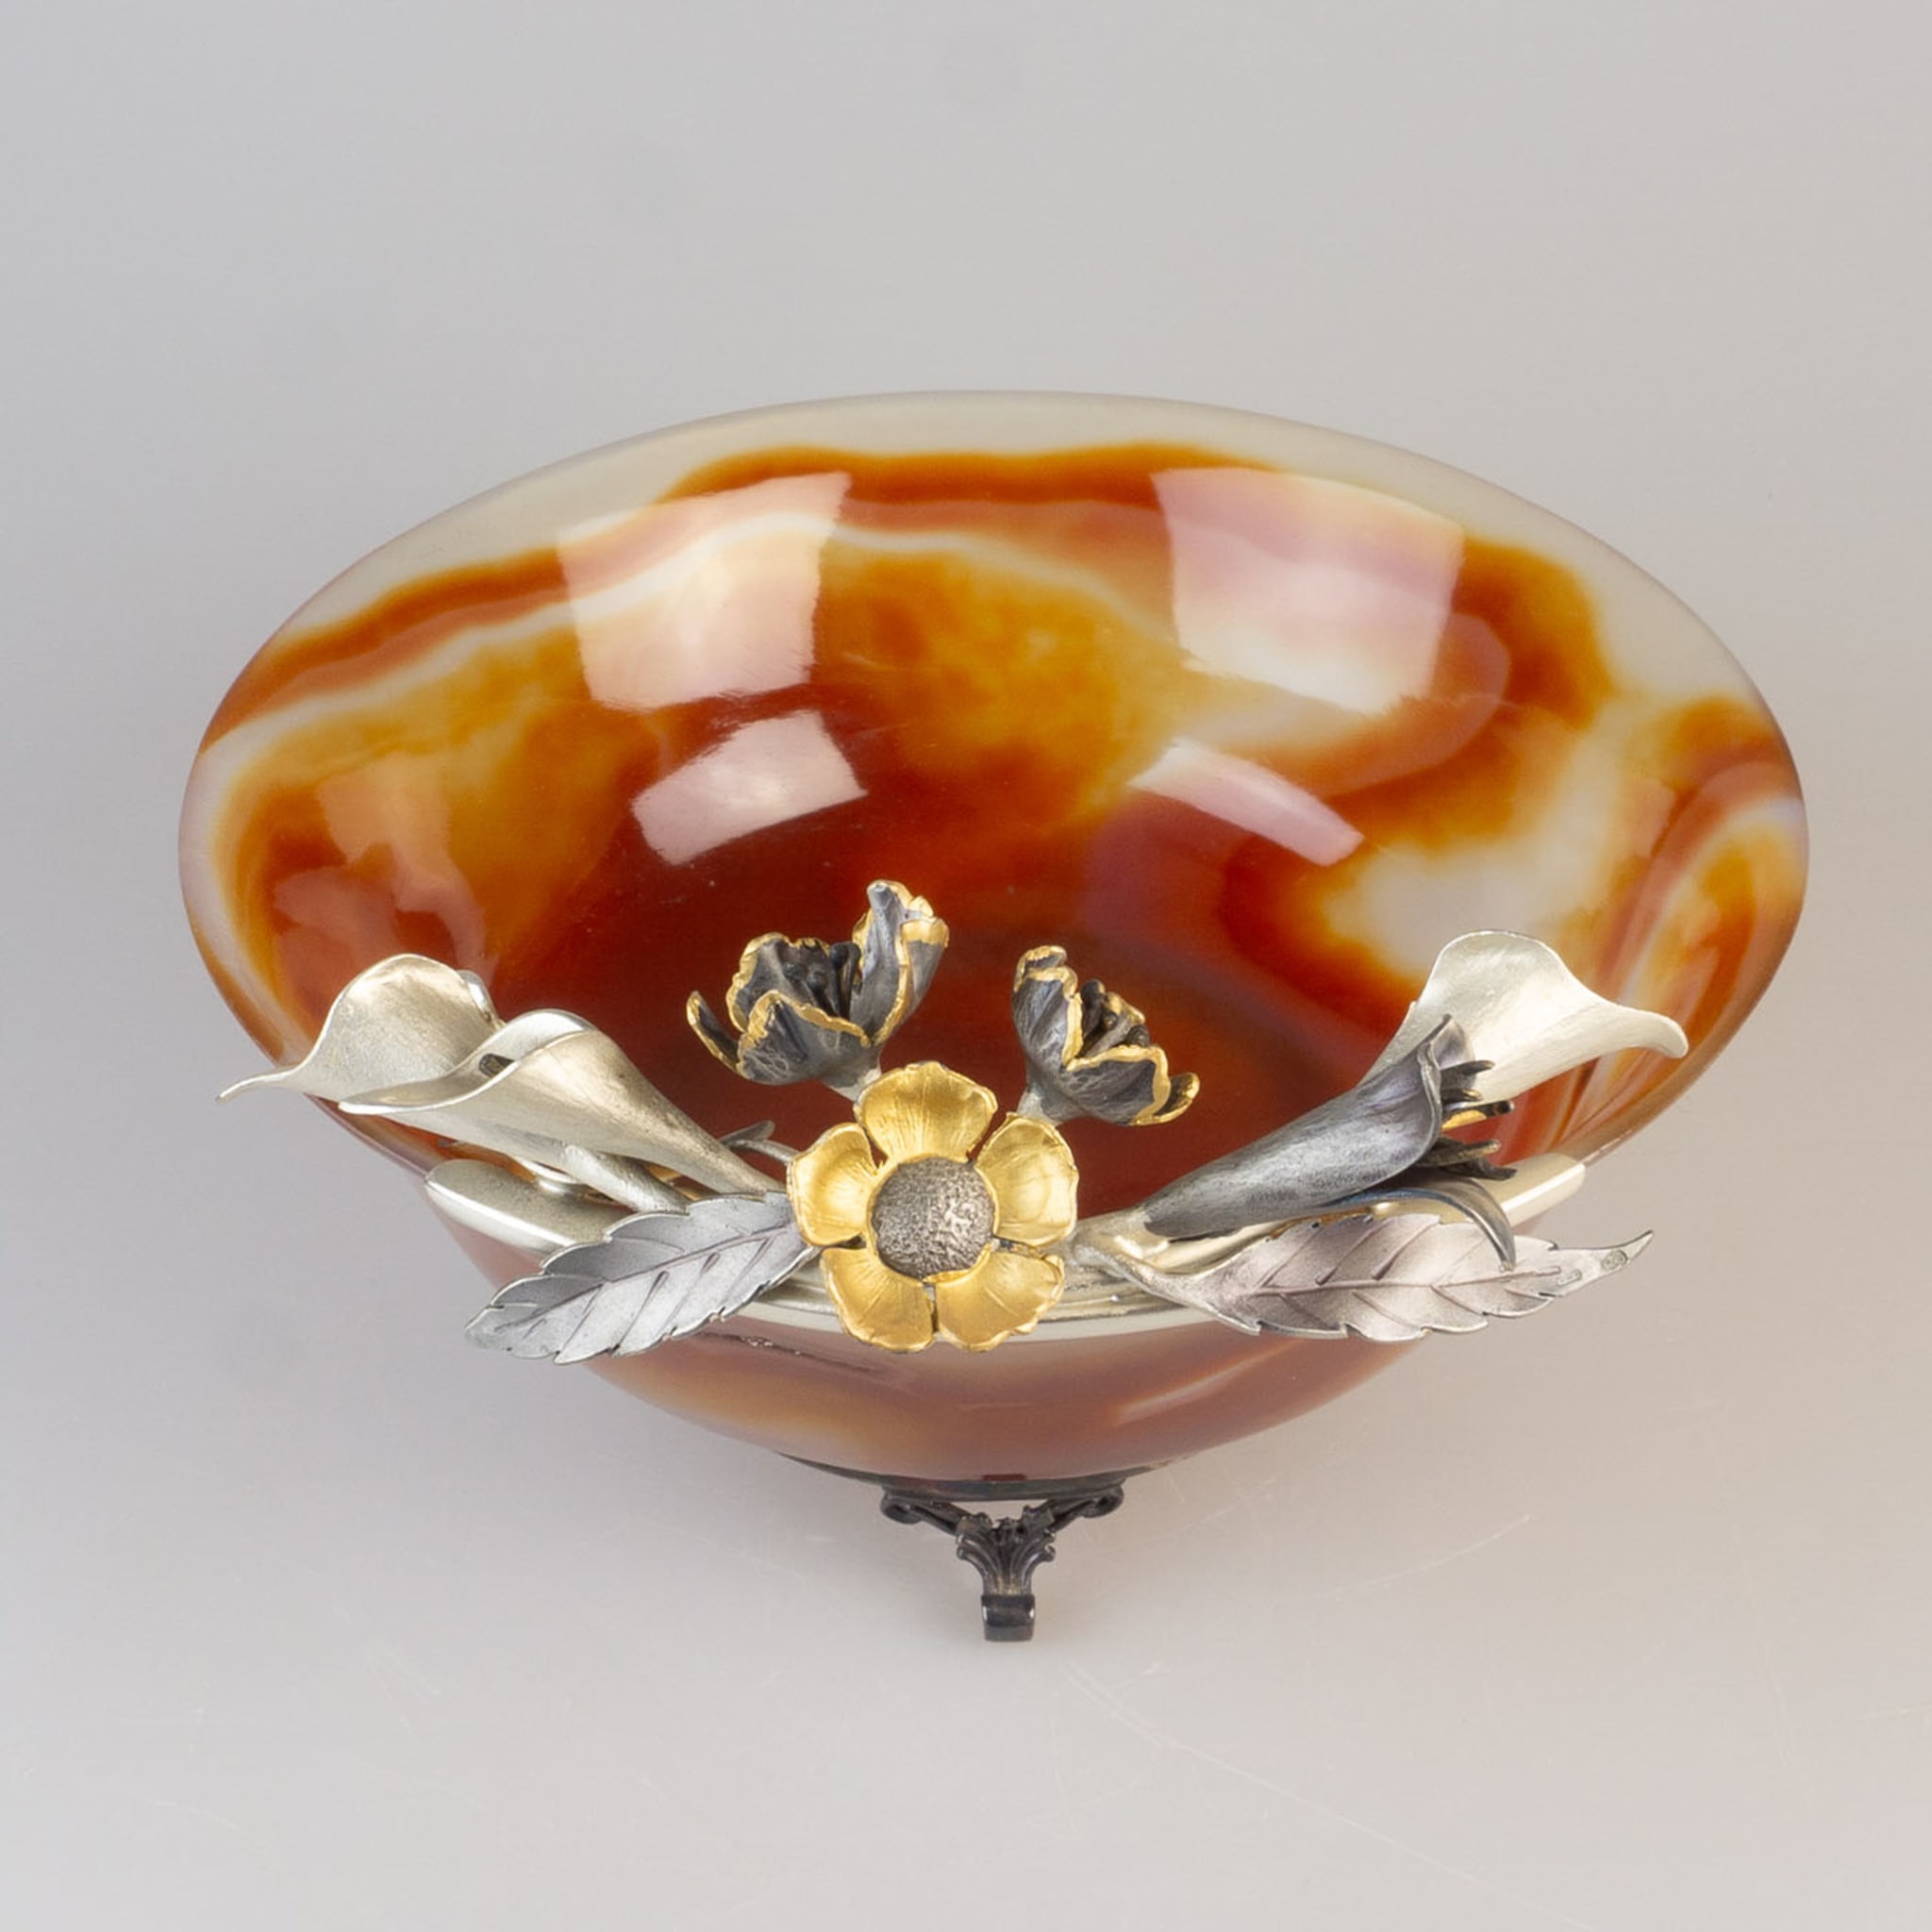 Carnelian Agate and Antique Silver Vide Poches - Alternative view 5